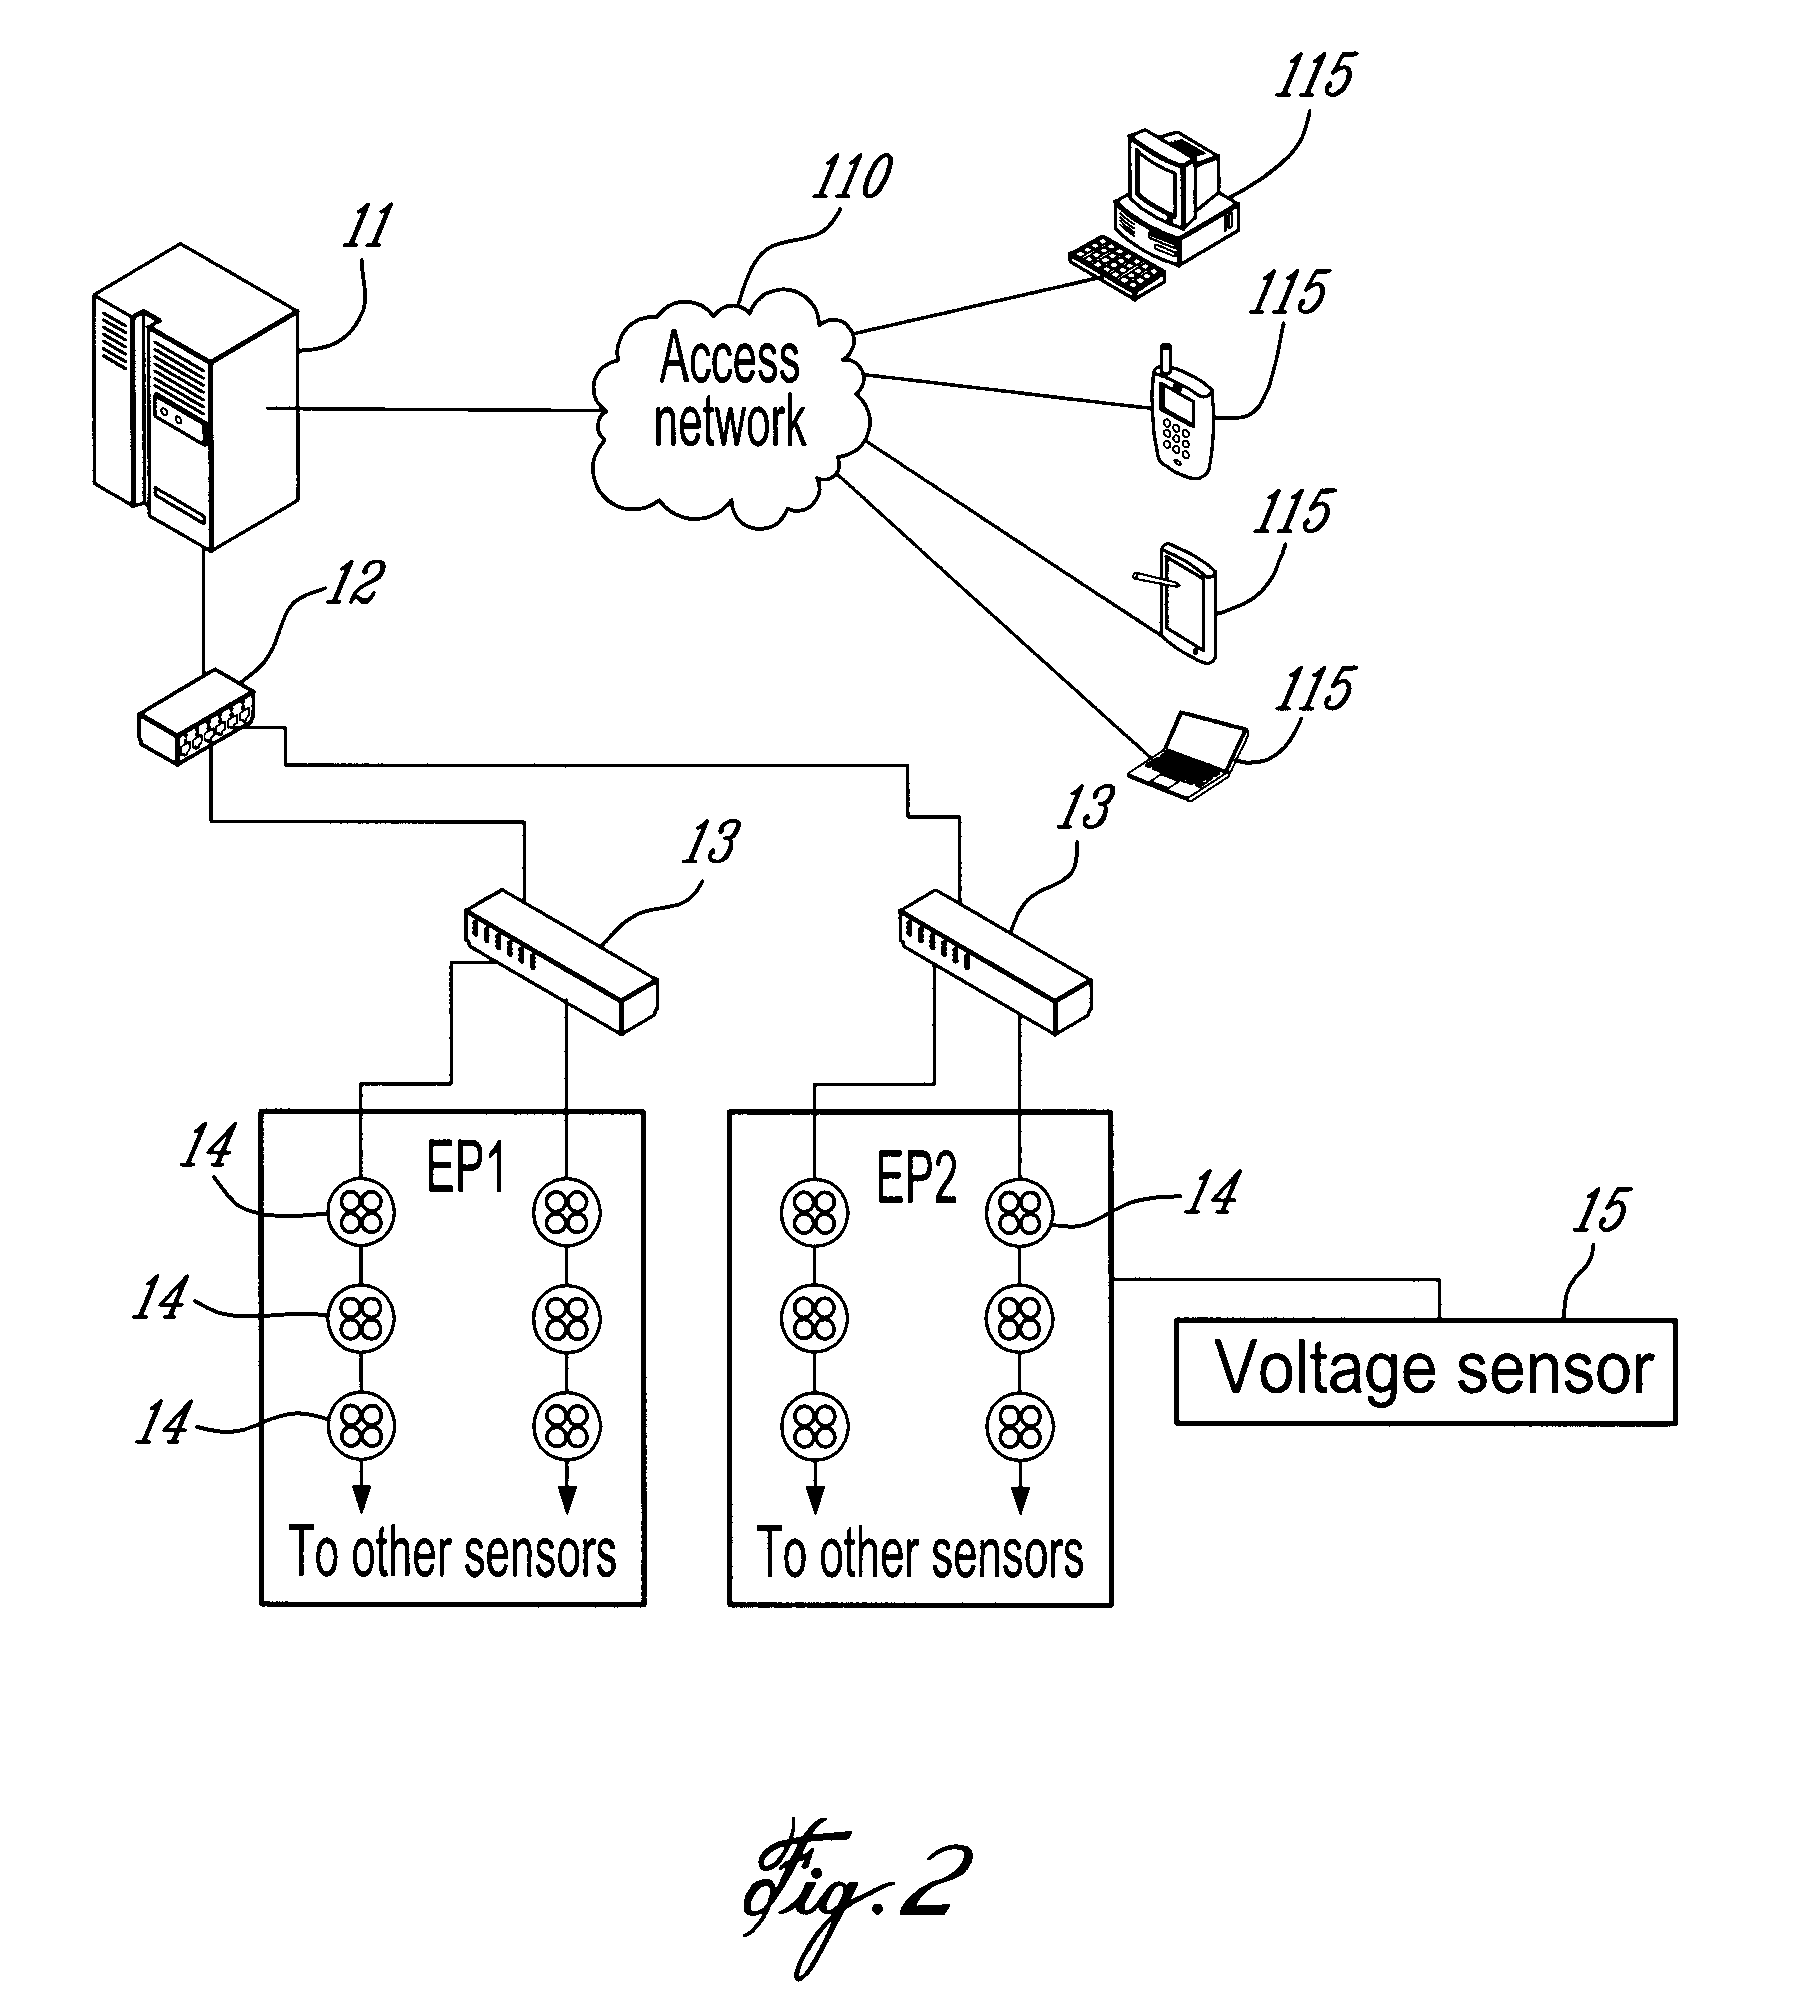 Electrical anomaly detection method and system